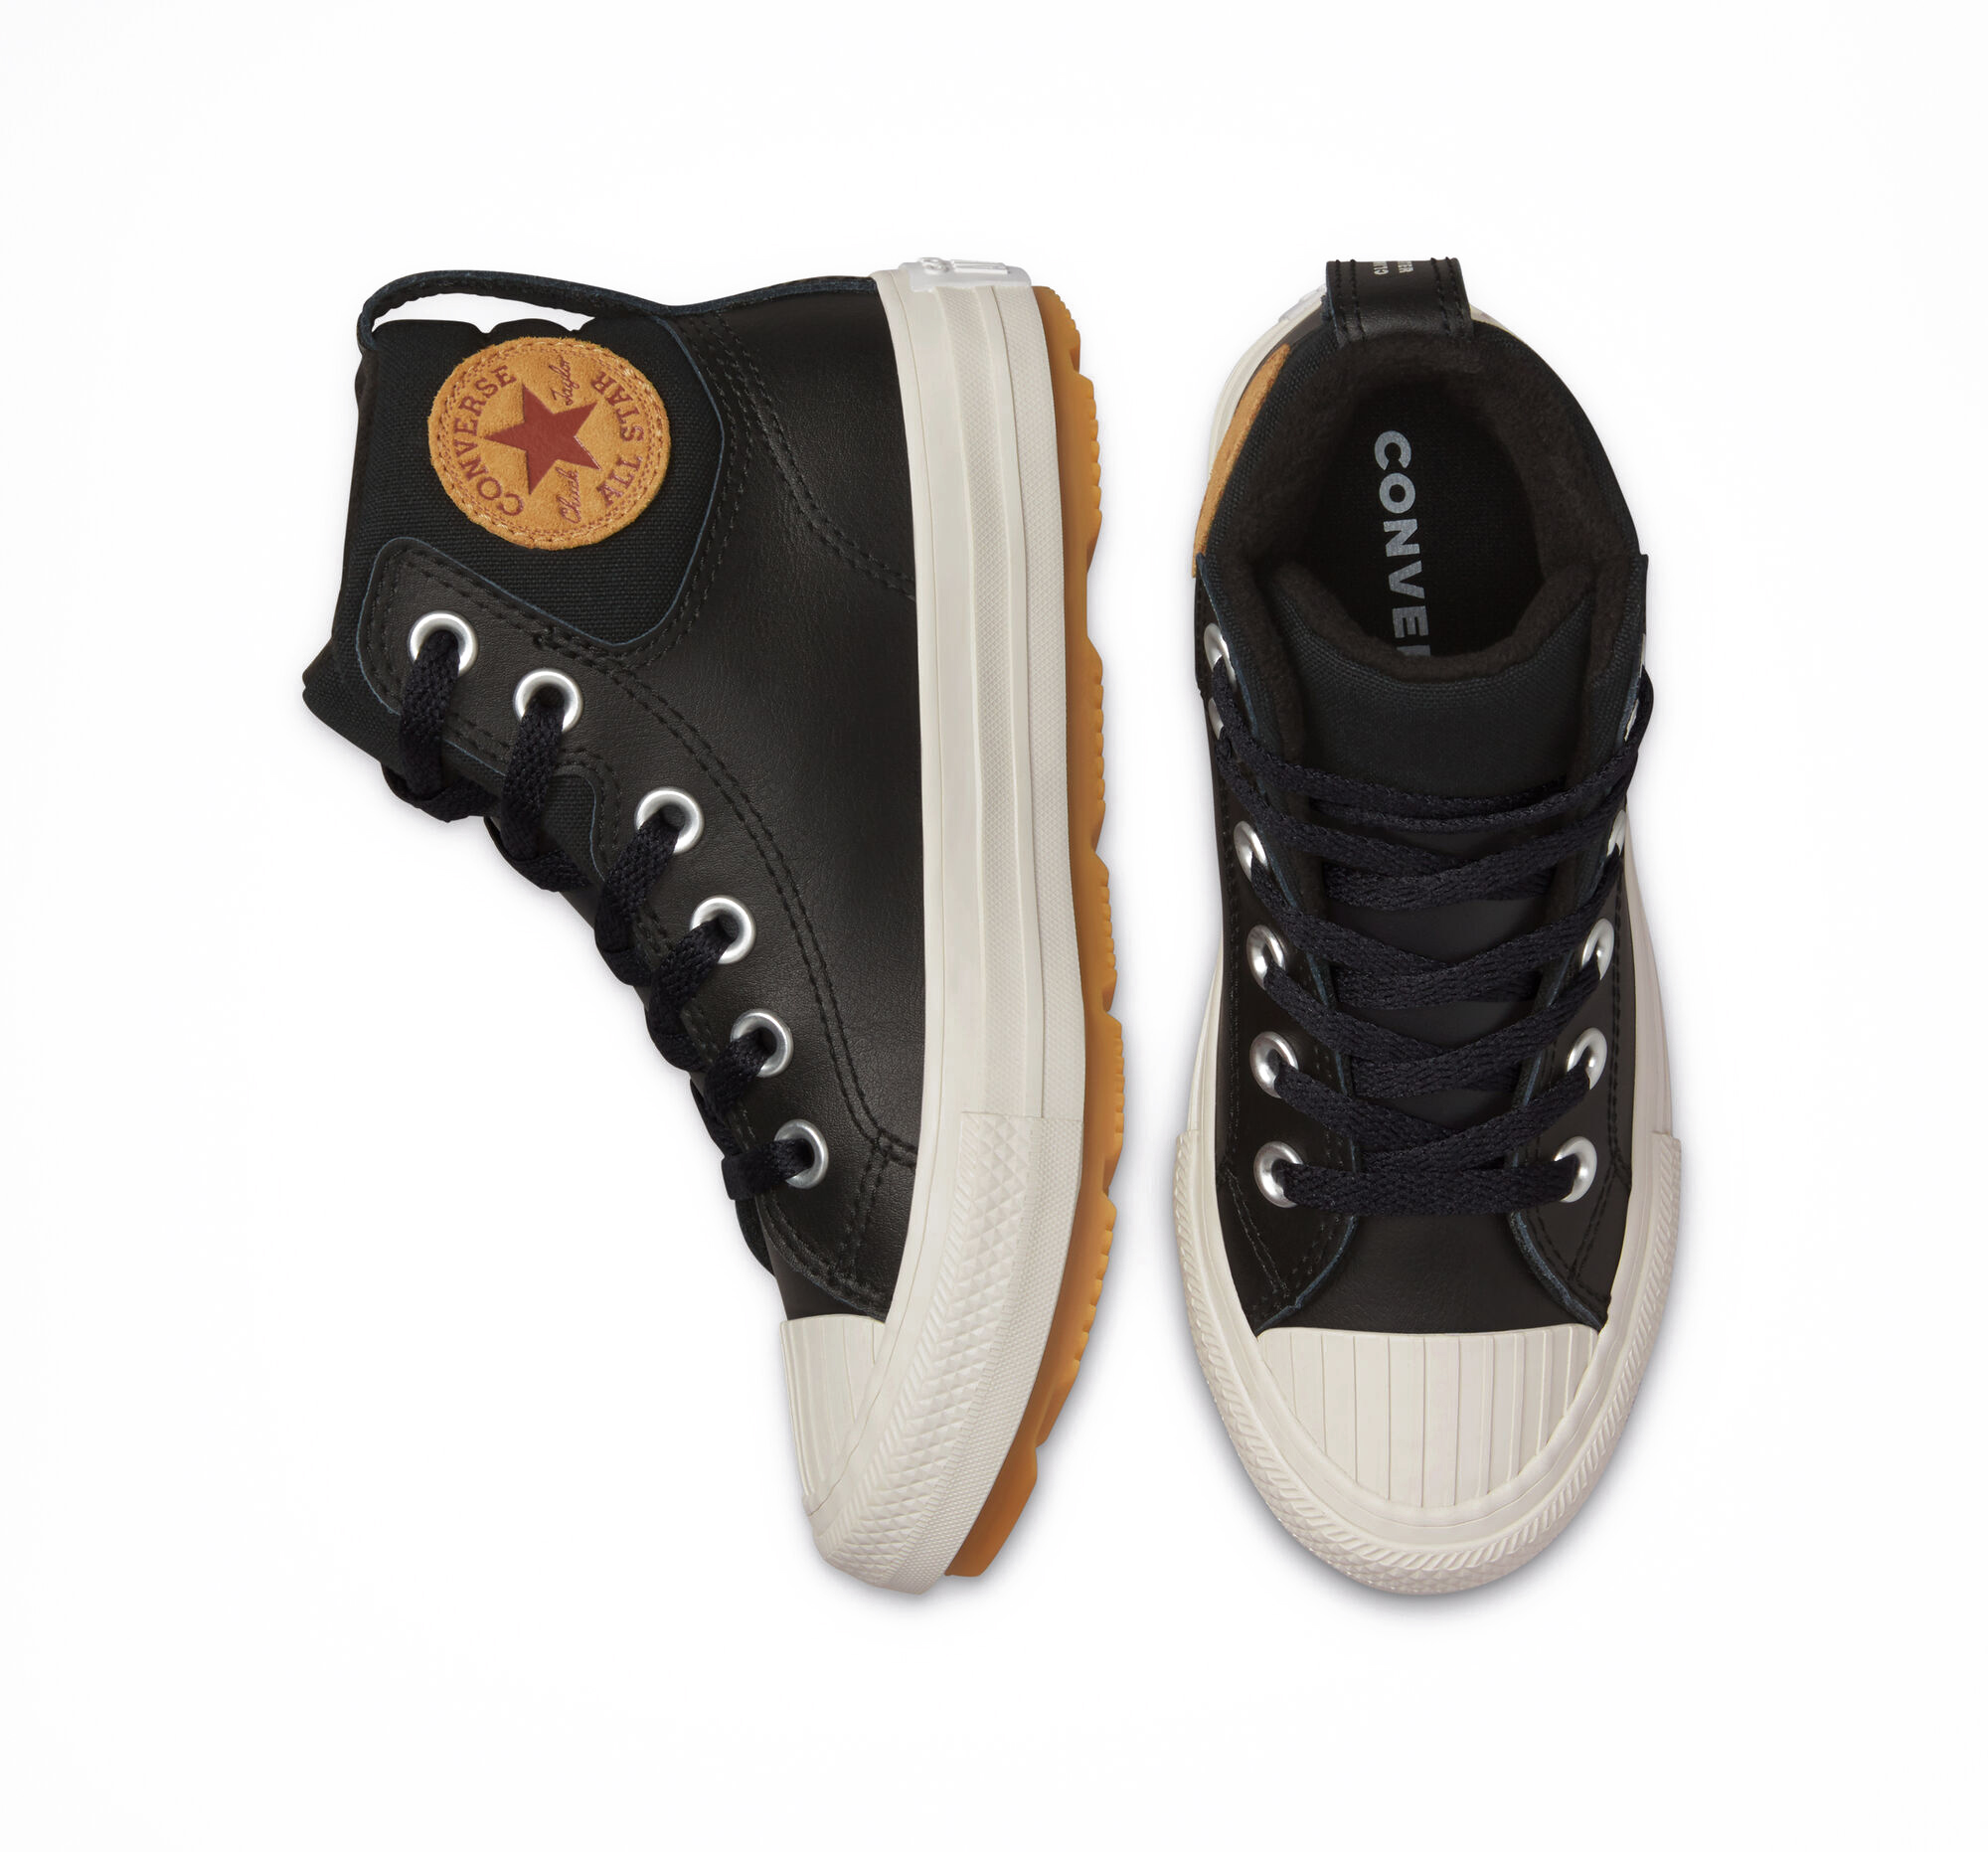 Converse Chuck Taylor All Star Berkshire Boot Kids - Black / Black / Pale Putty Leather